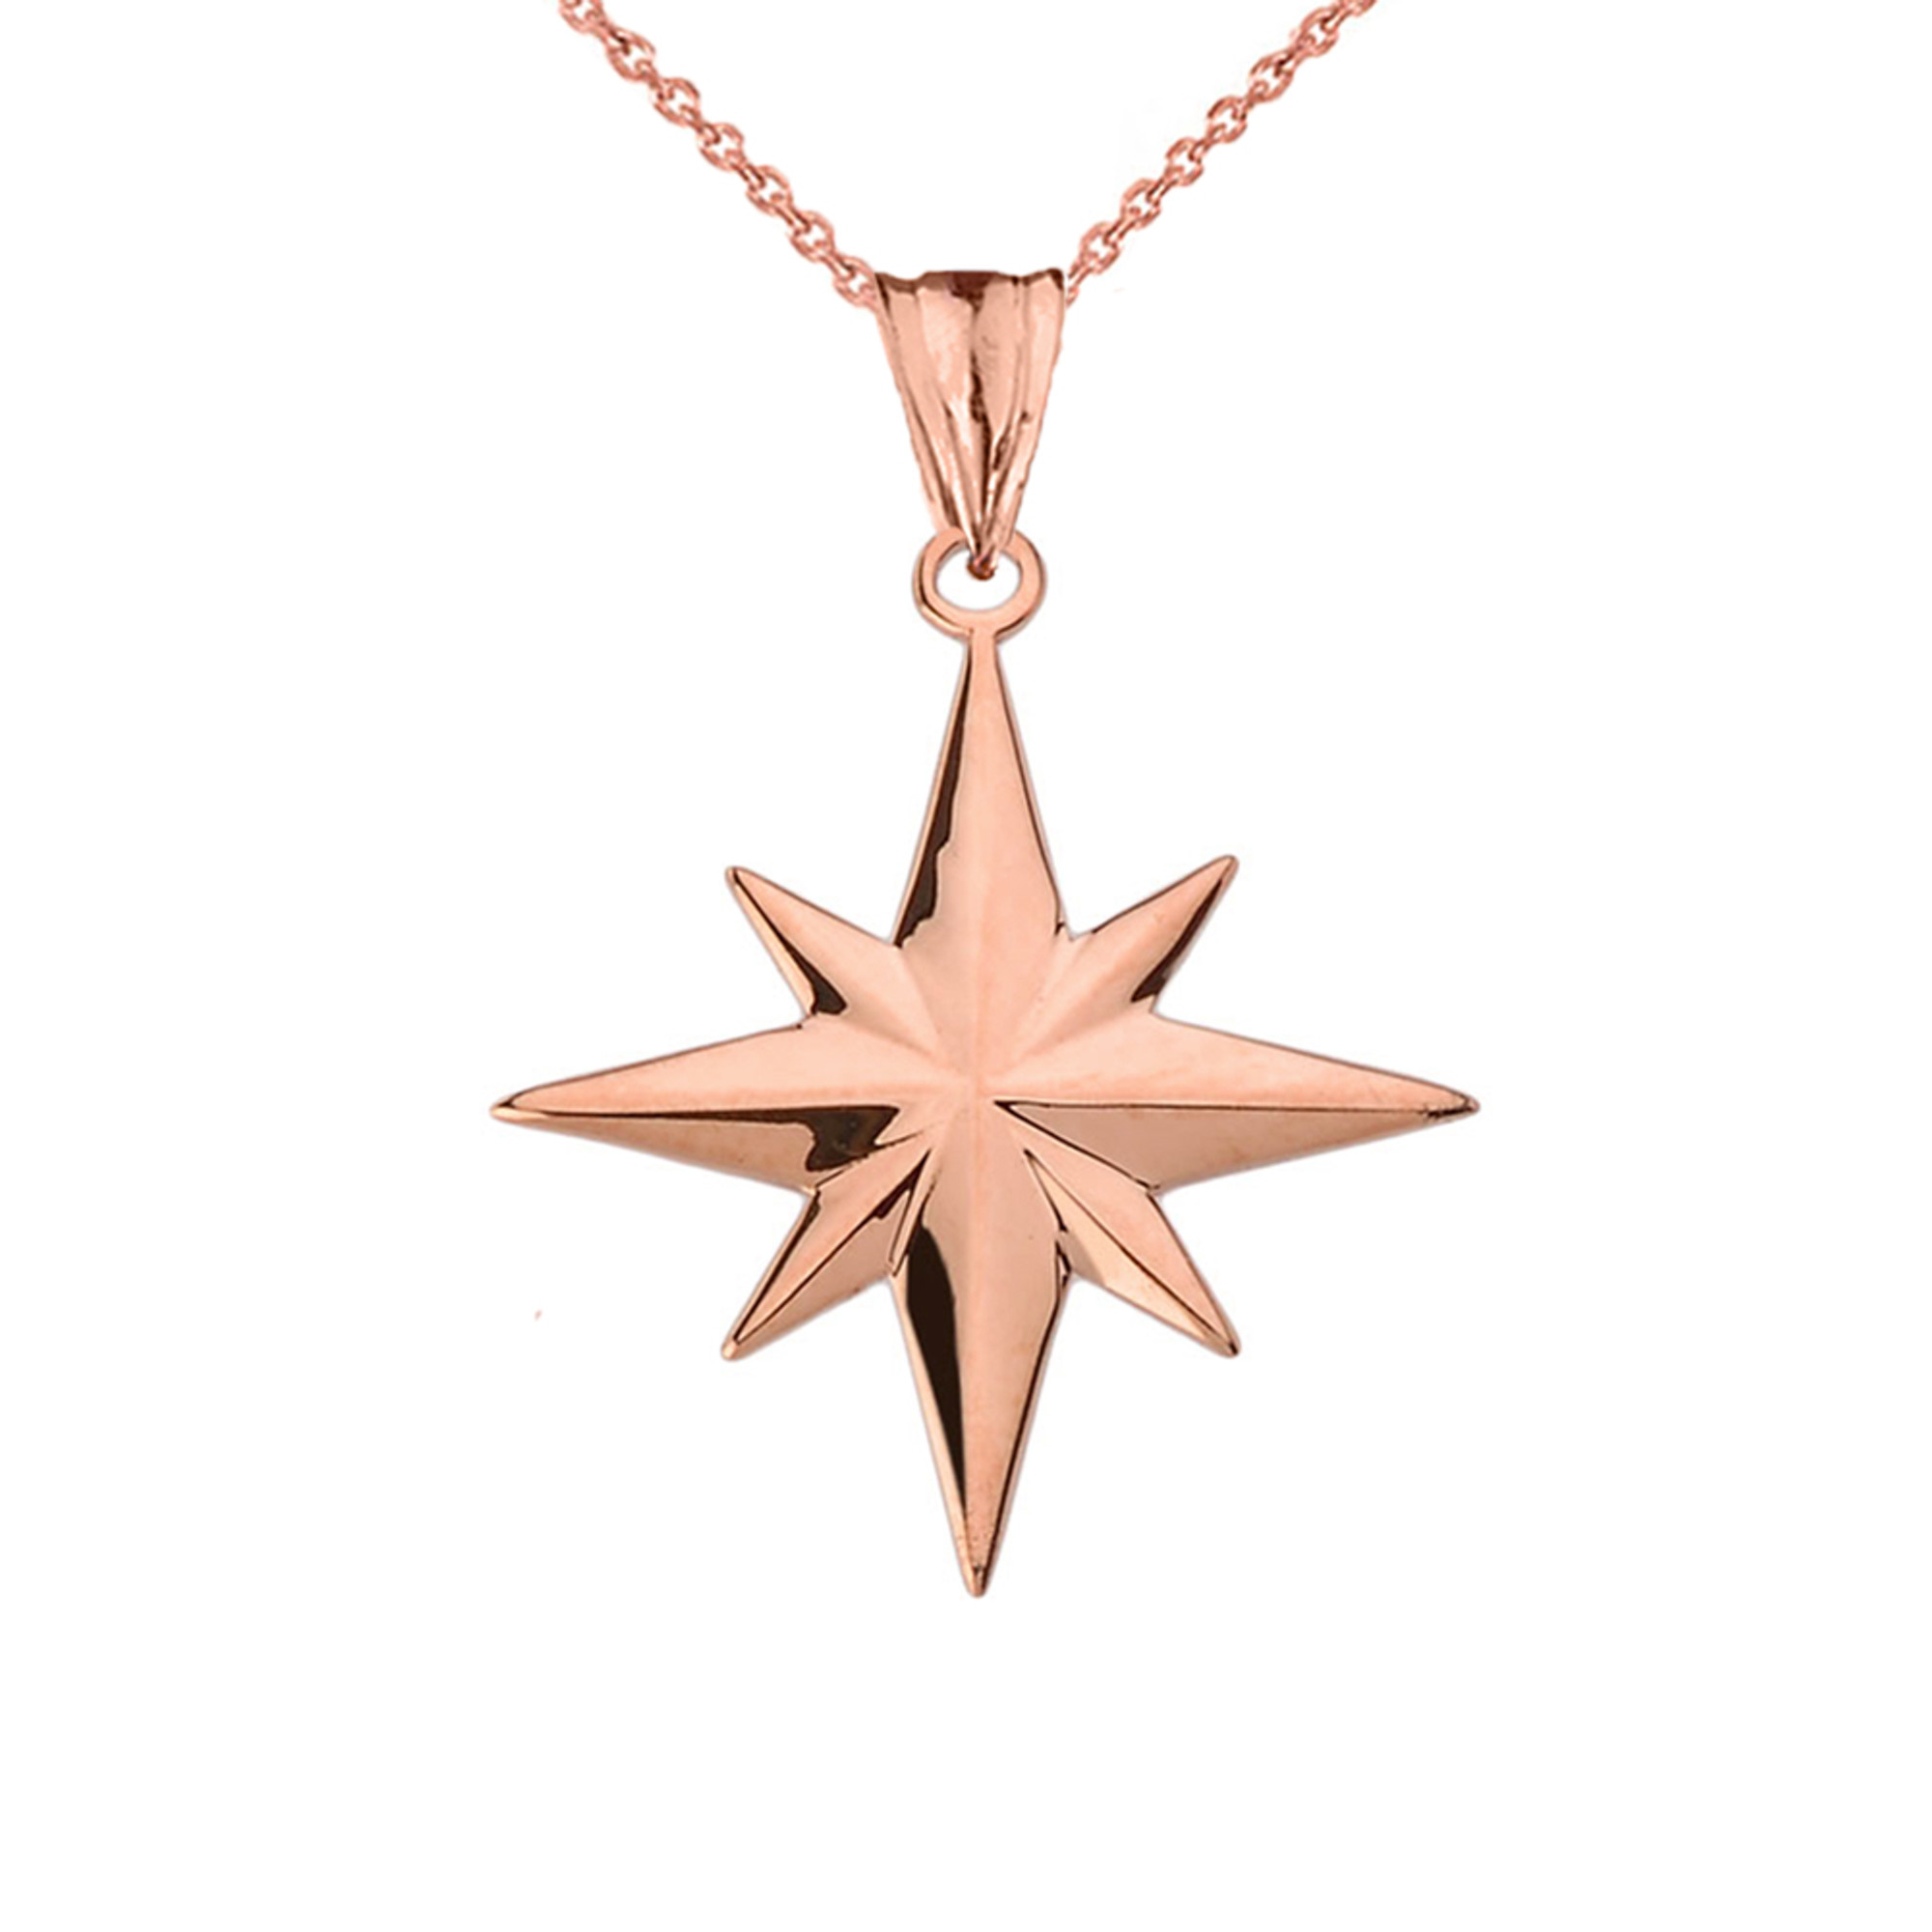 Bling Jewelry Celestial 8-Point North Star Burst Pendant Necklace with CZ  in Sterling Silver - Walmart.com